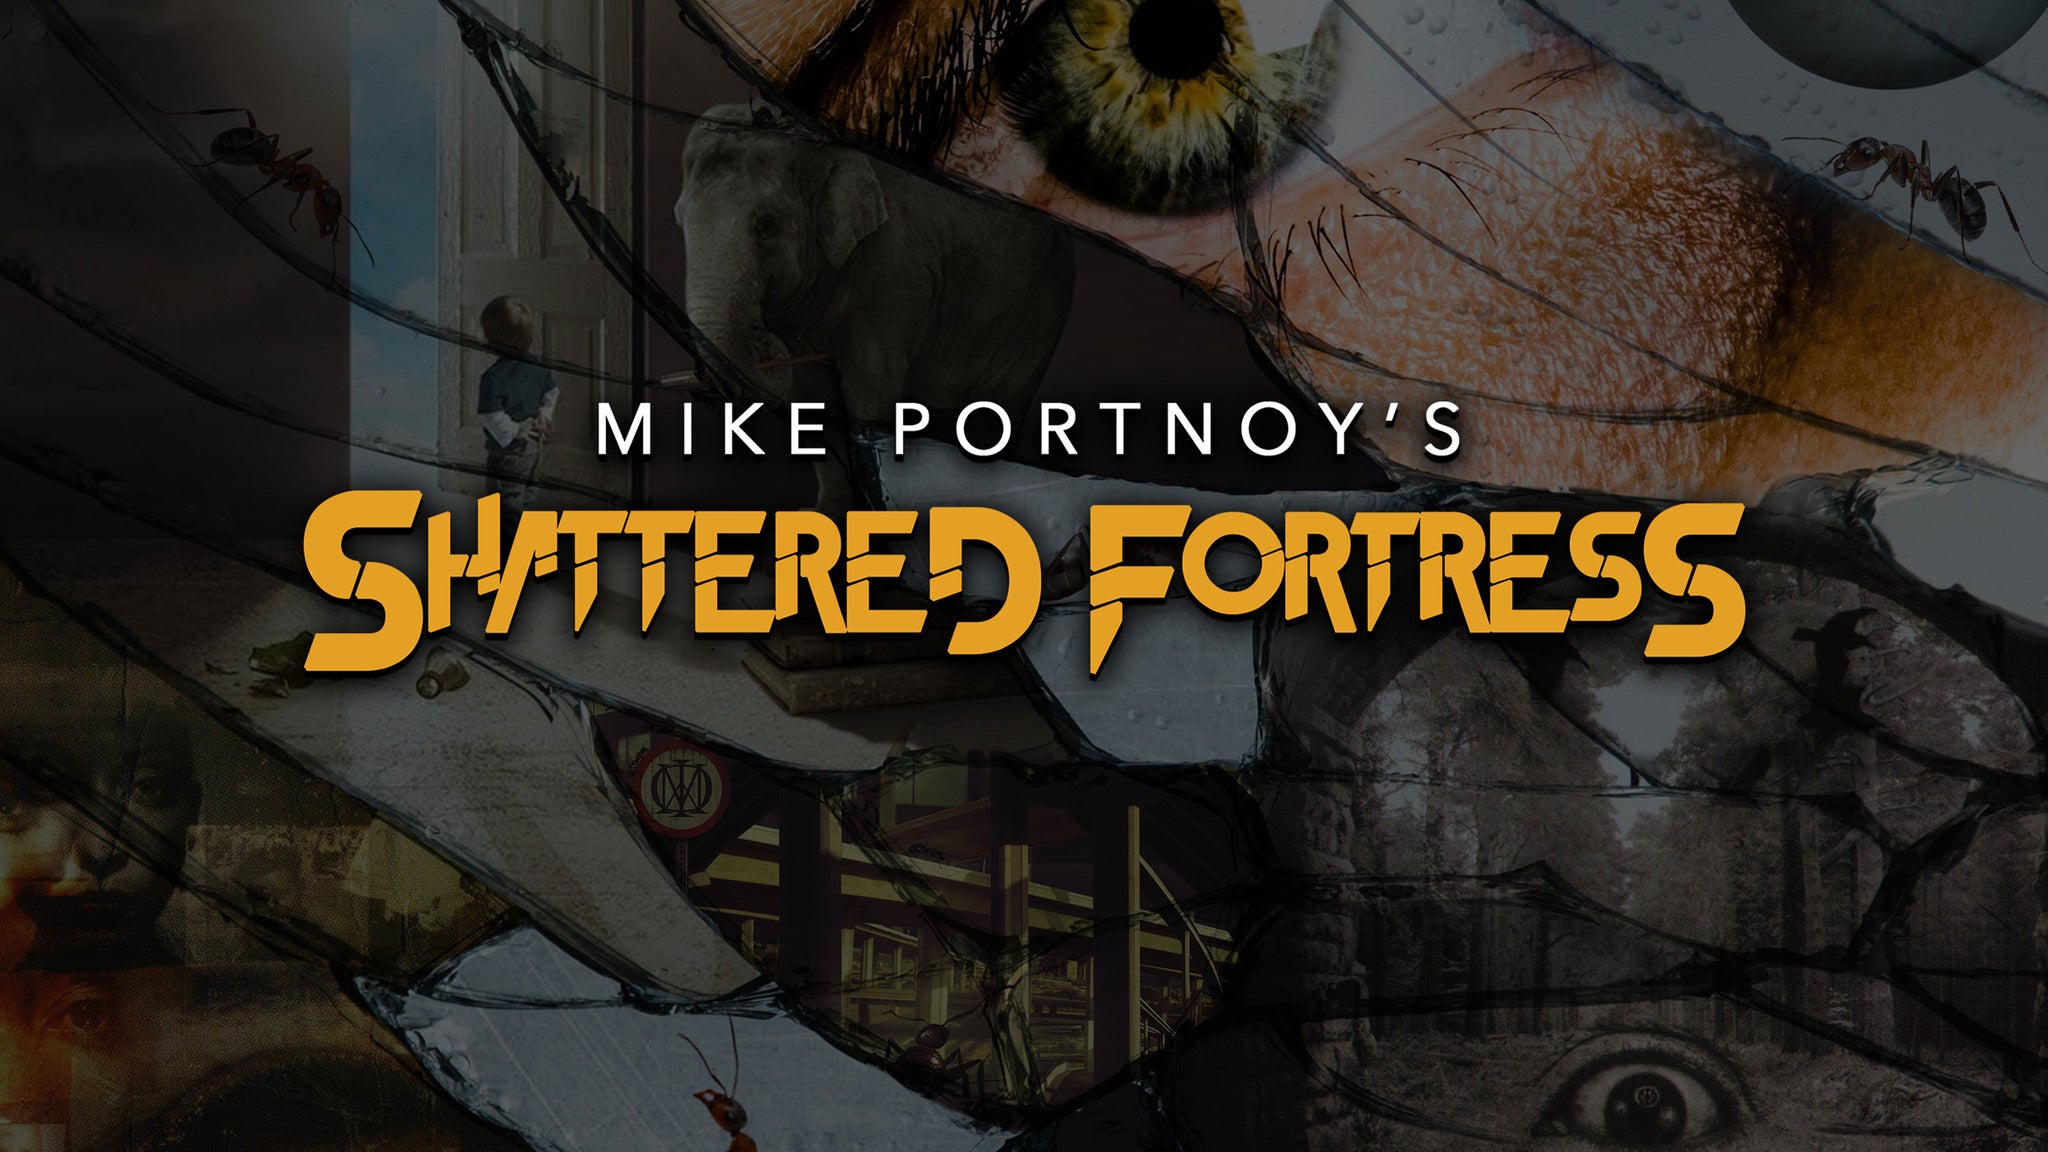 Mike Portnoy's Shattered Fortress playing Dream Theaters 12 Step Suite in New York promo photo for Live Nation Mobile App presale offer code